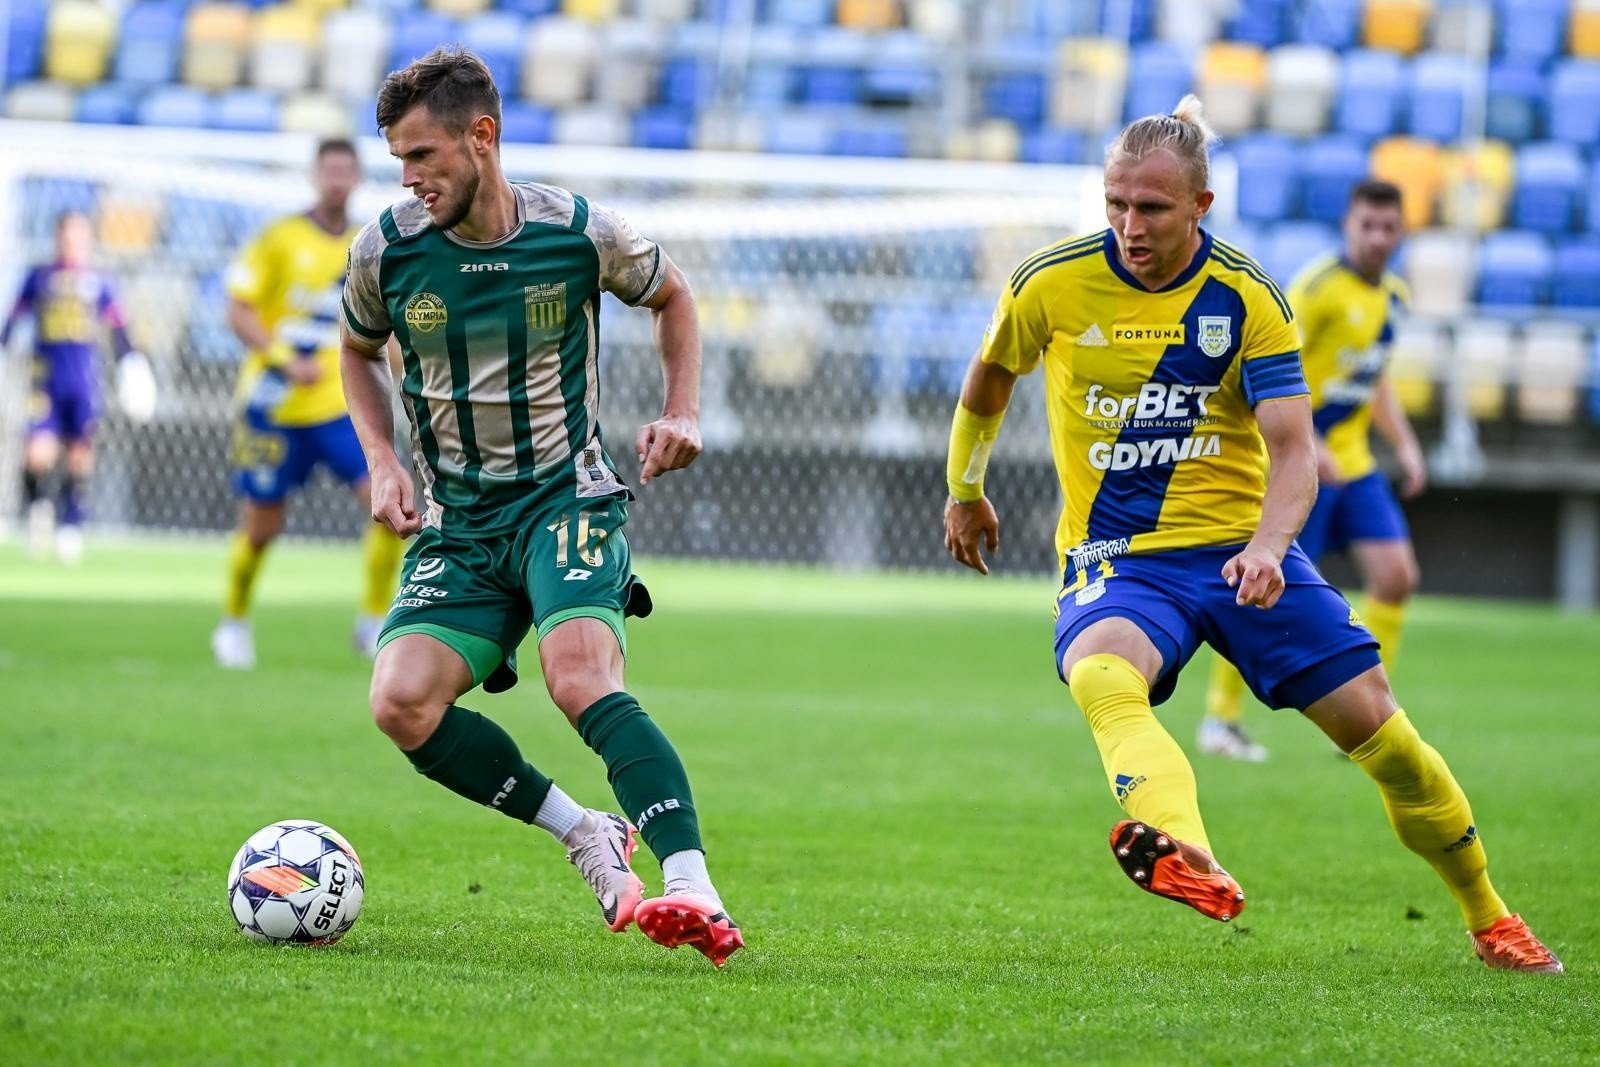 Arka Gdynia in Rzeszow in a match against Stal begins the battle for the Ekstraklasa! Will new players bring quality? Dawid Gojny, the captain of the yellow-blues